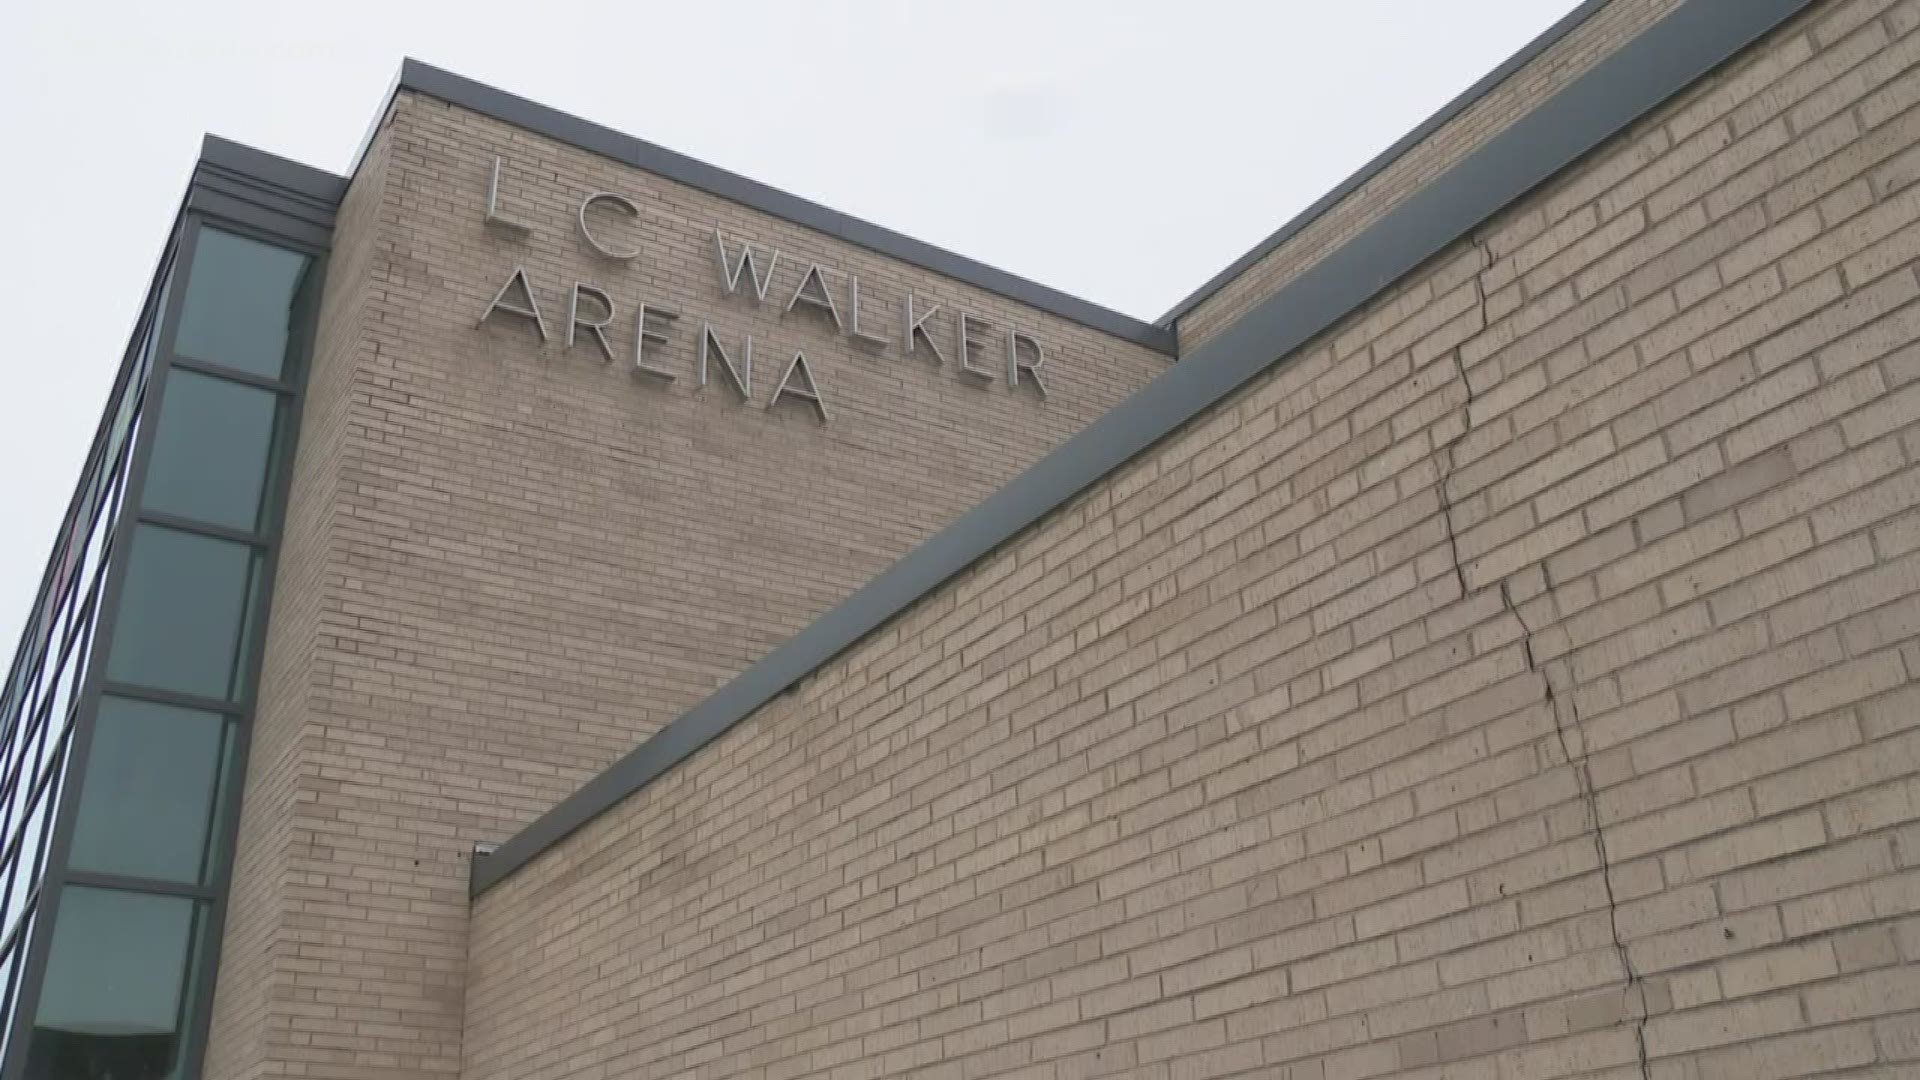 The Muskegon City Commission approved changing the name of the local arena to the Mercy Health Arena. It was passed in a 4-1 vote.